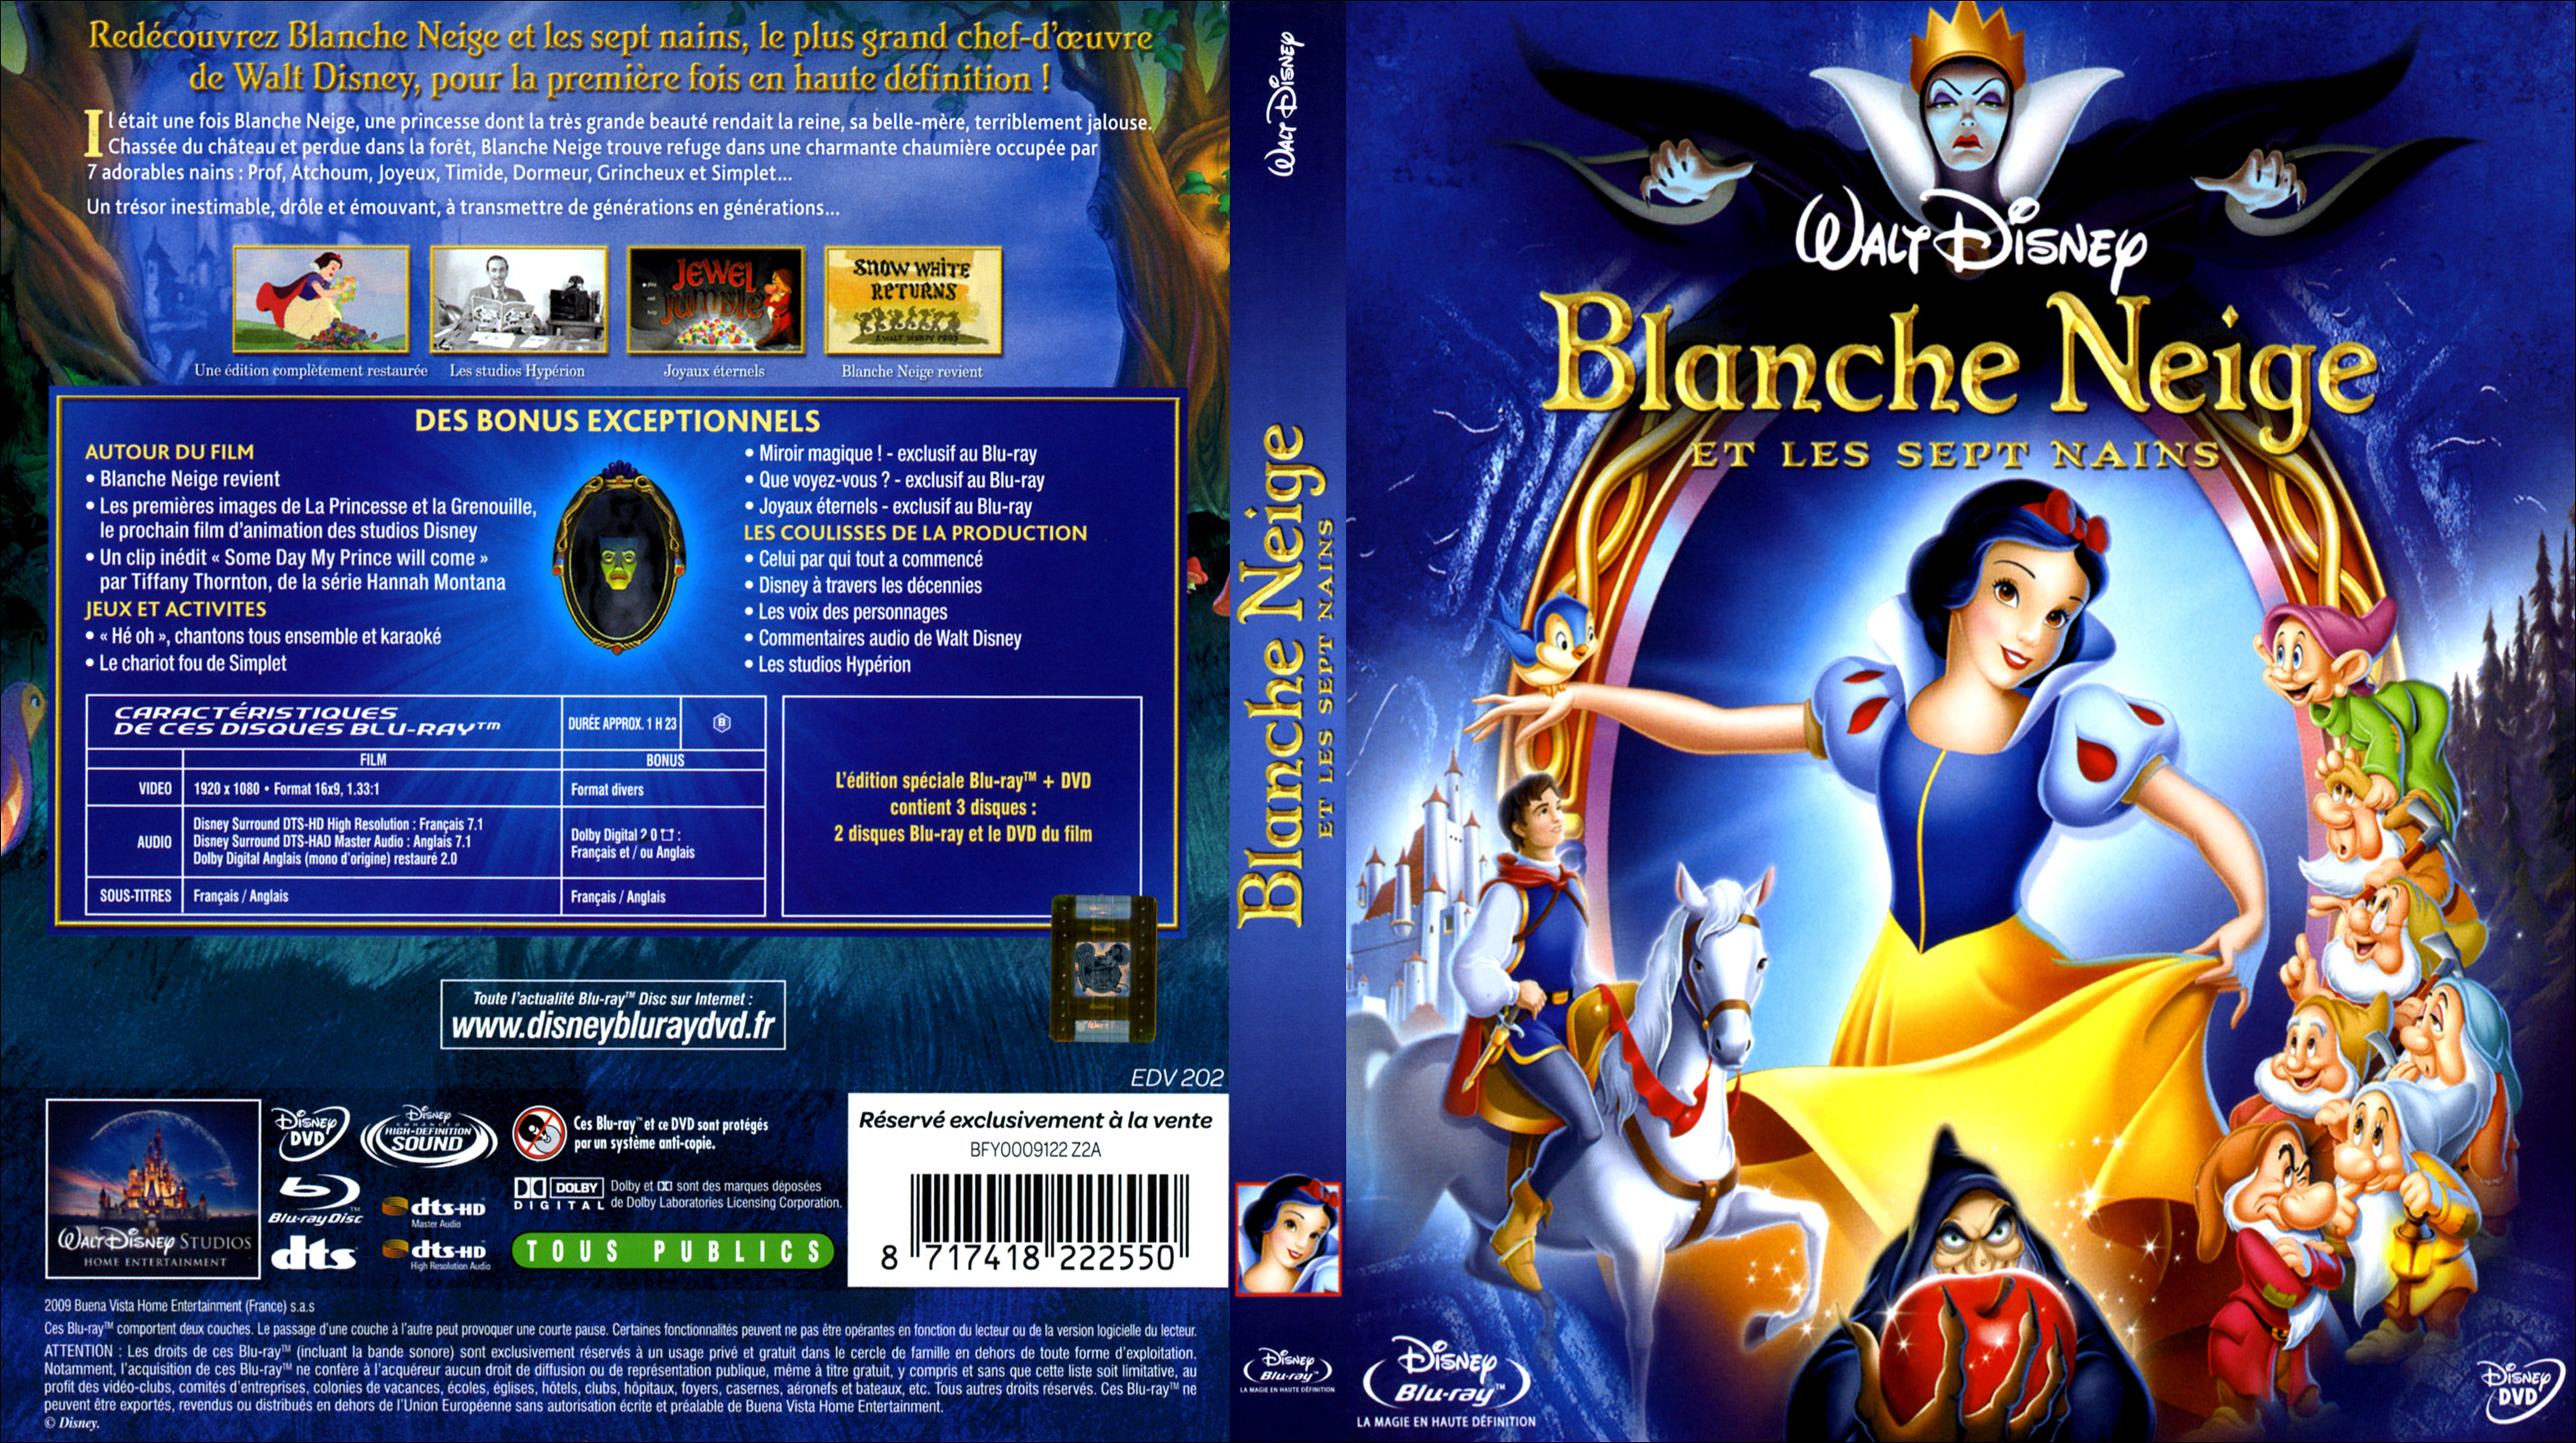 Jaquette DVD Blanche neige et les sept nains (BLU-RAY)